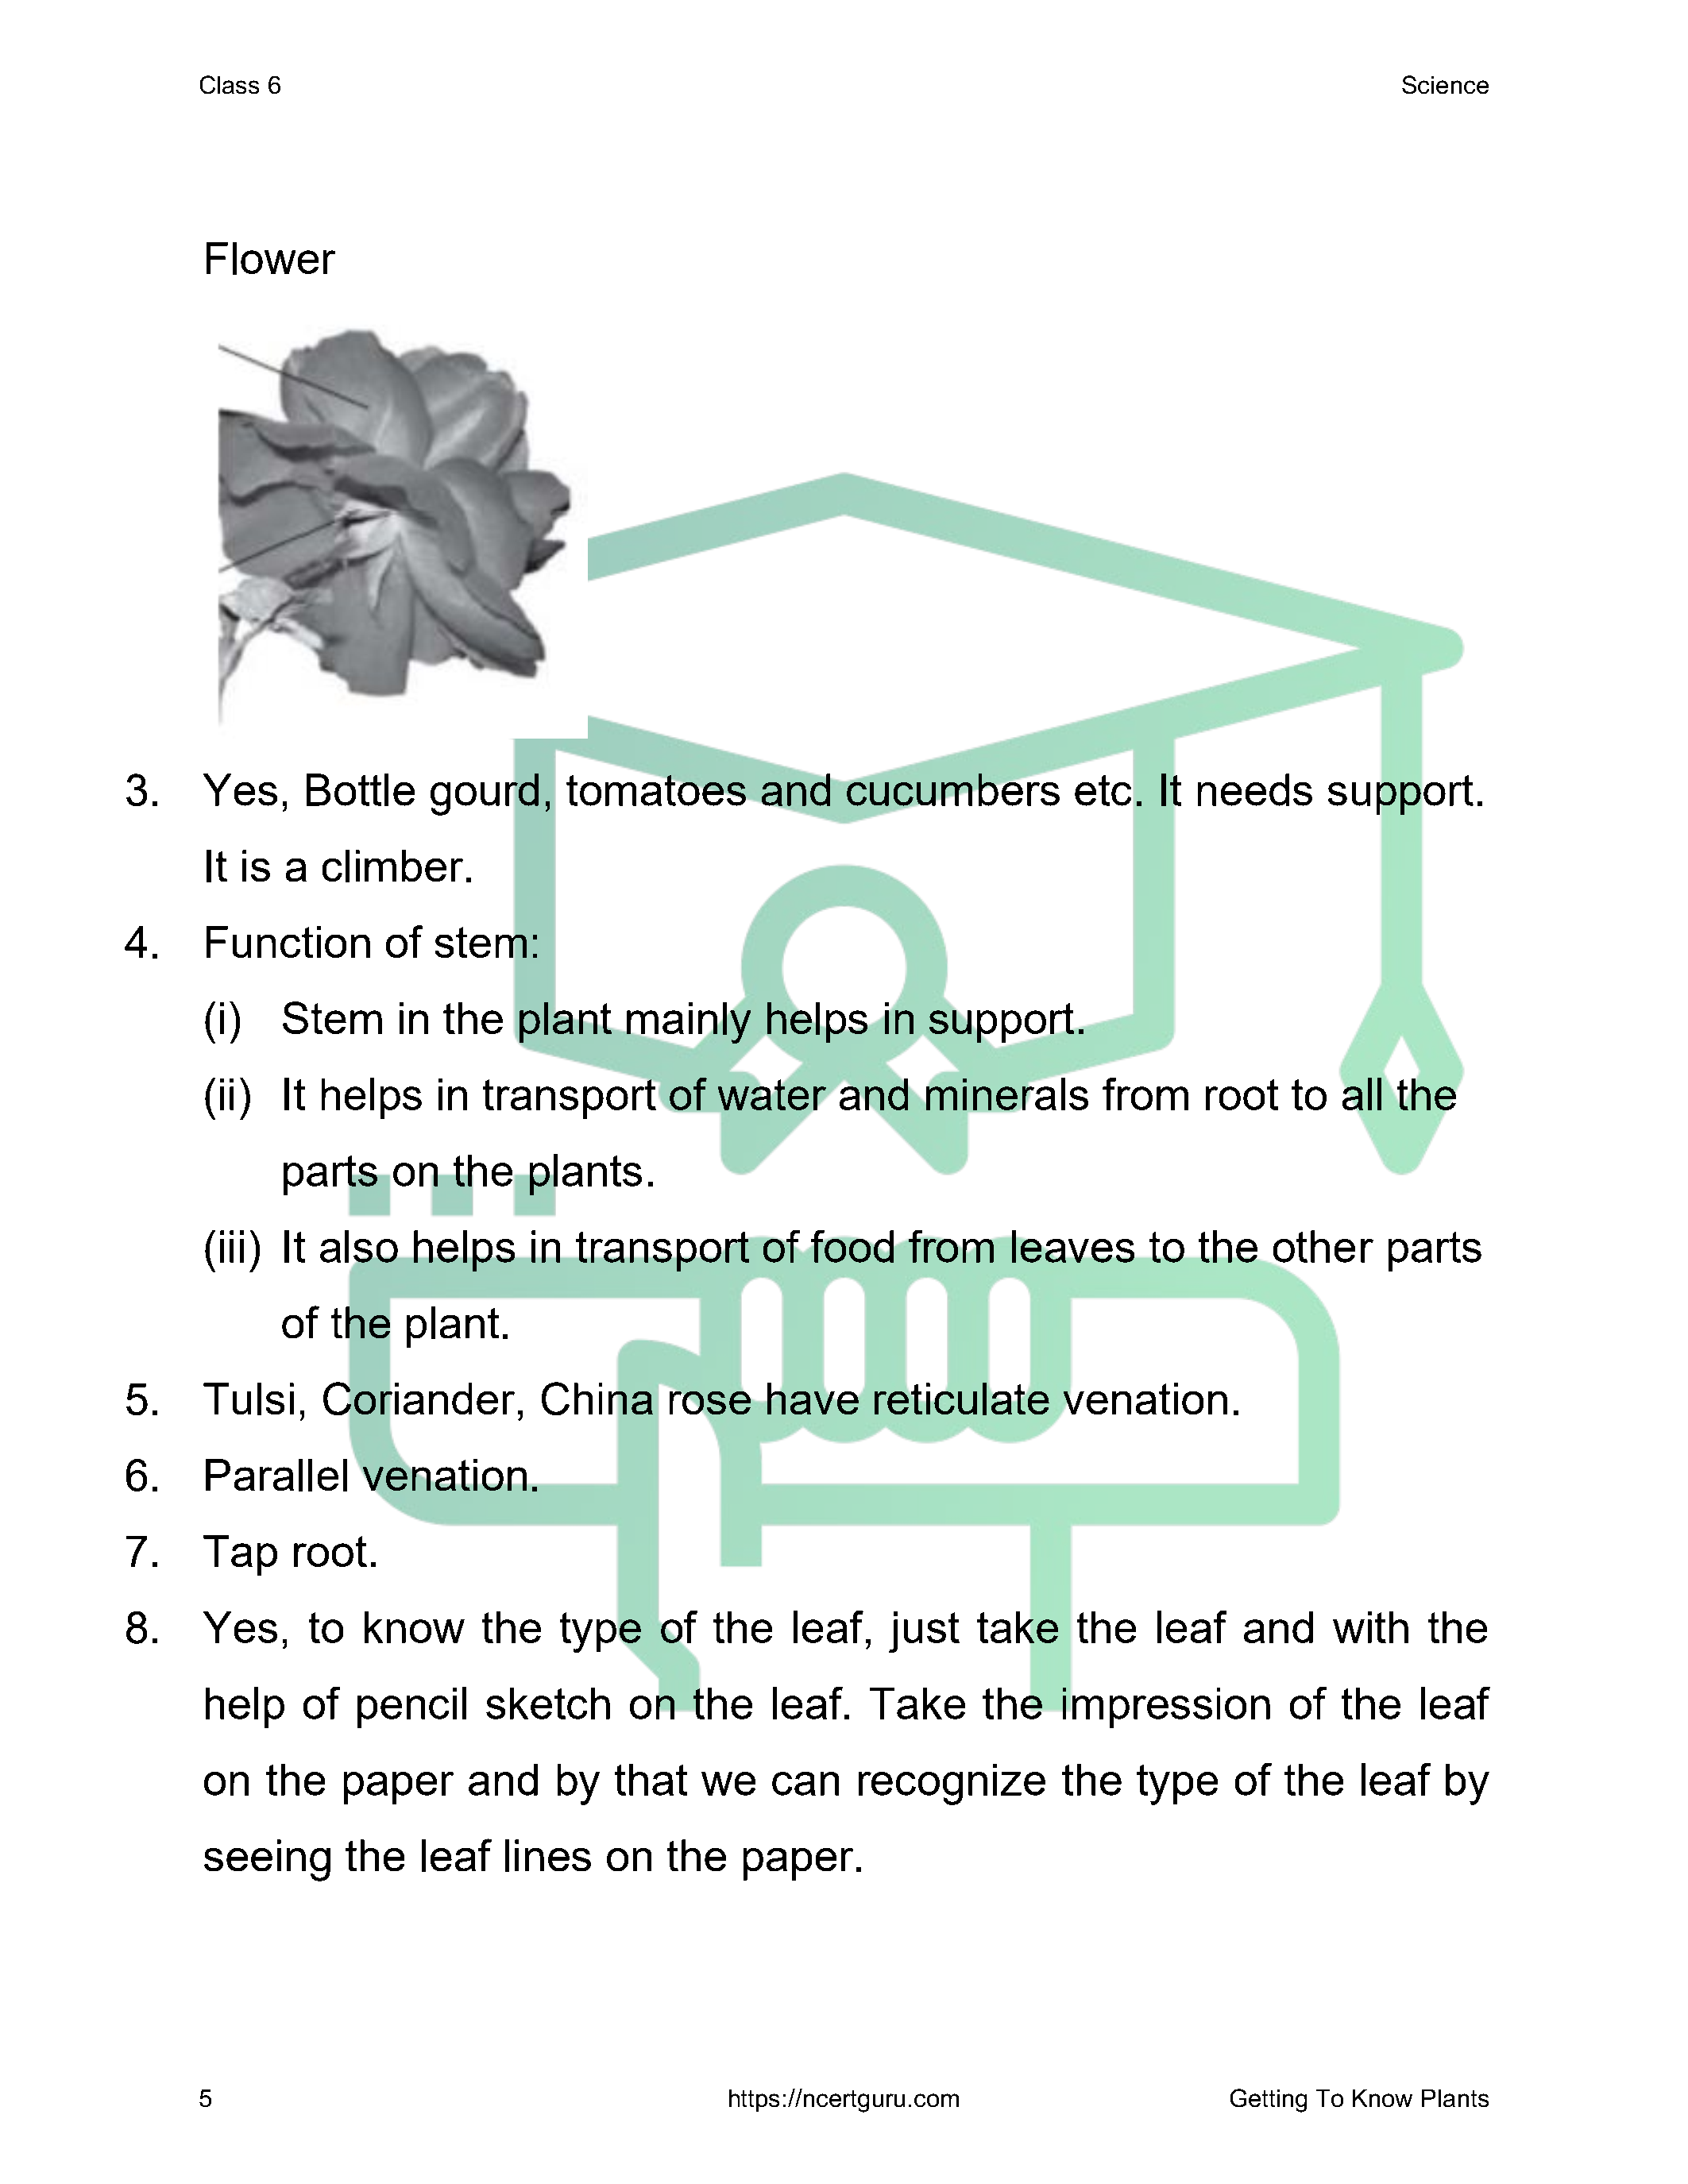 NCERT Solutions for Class 6 science Chapter 7